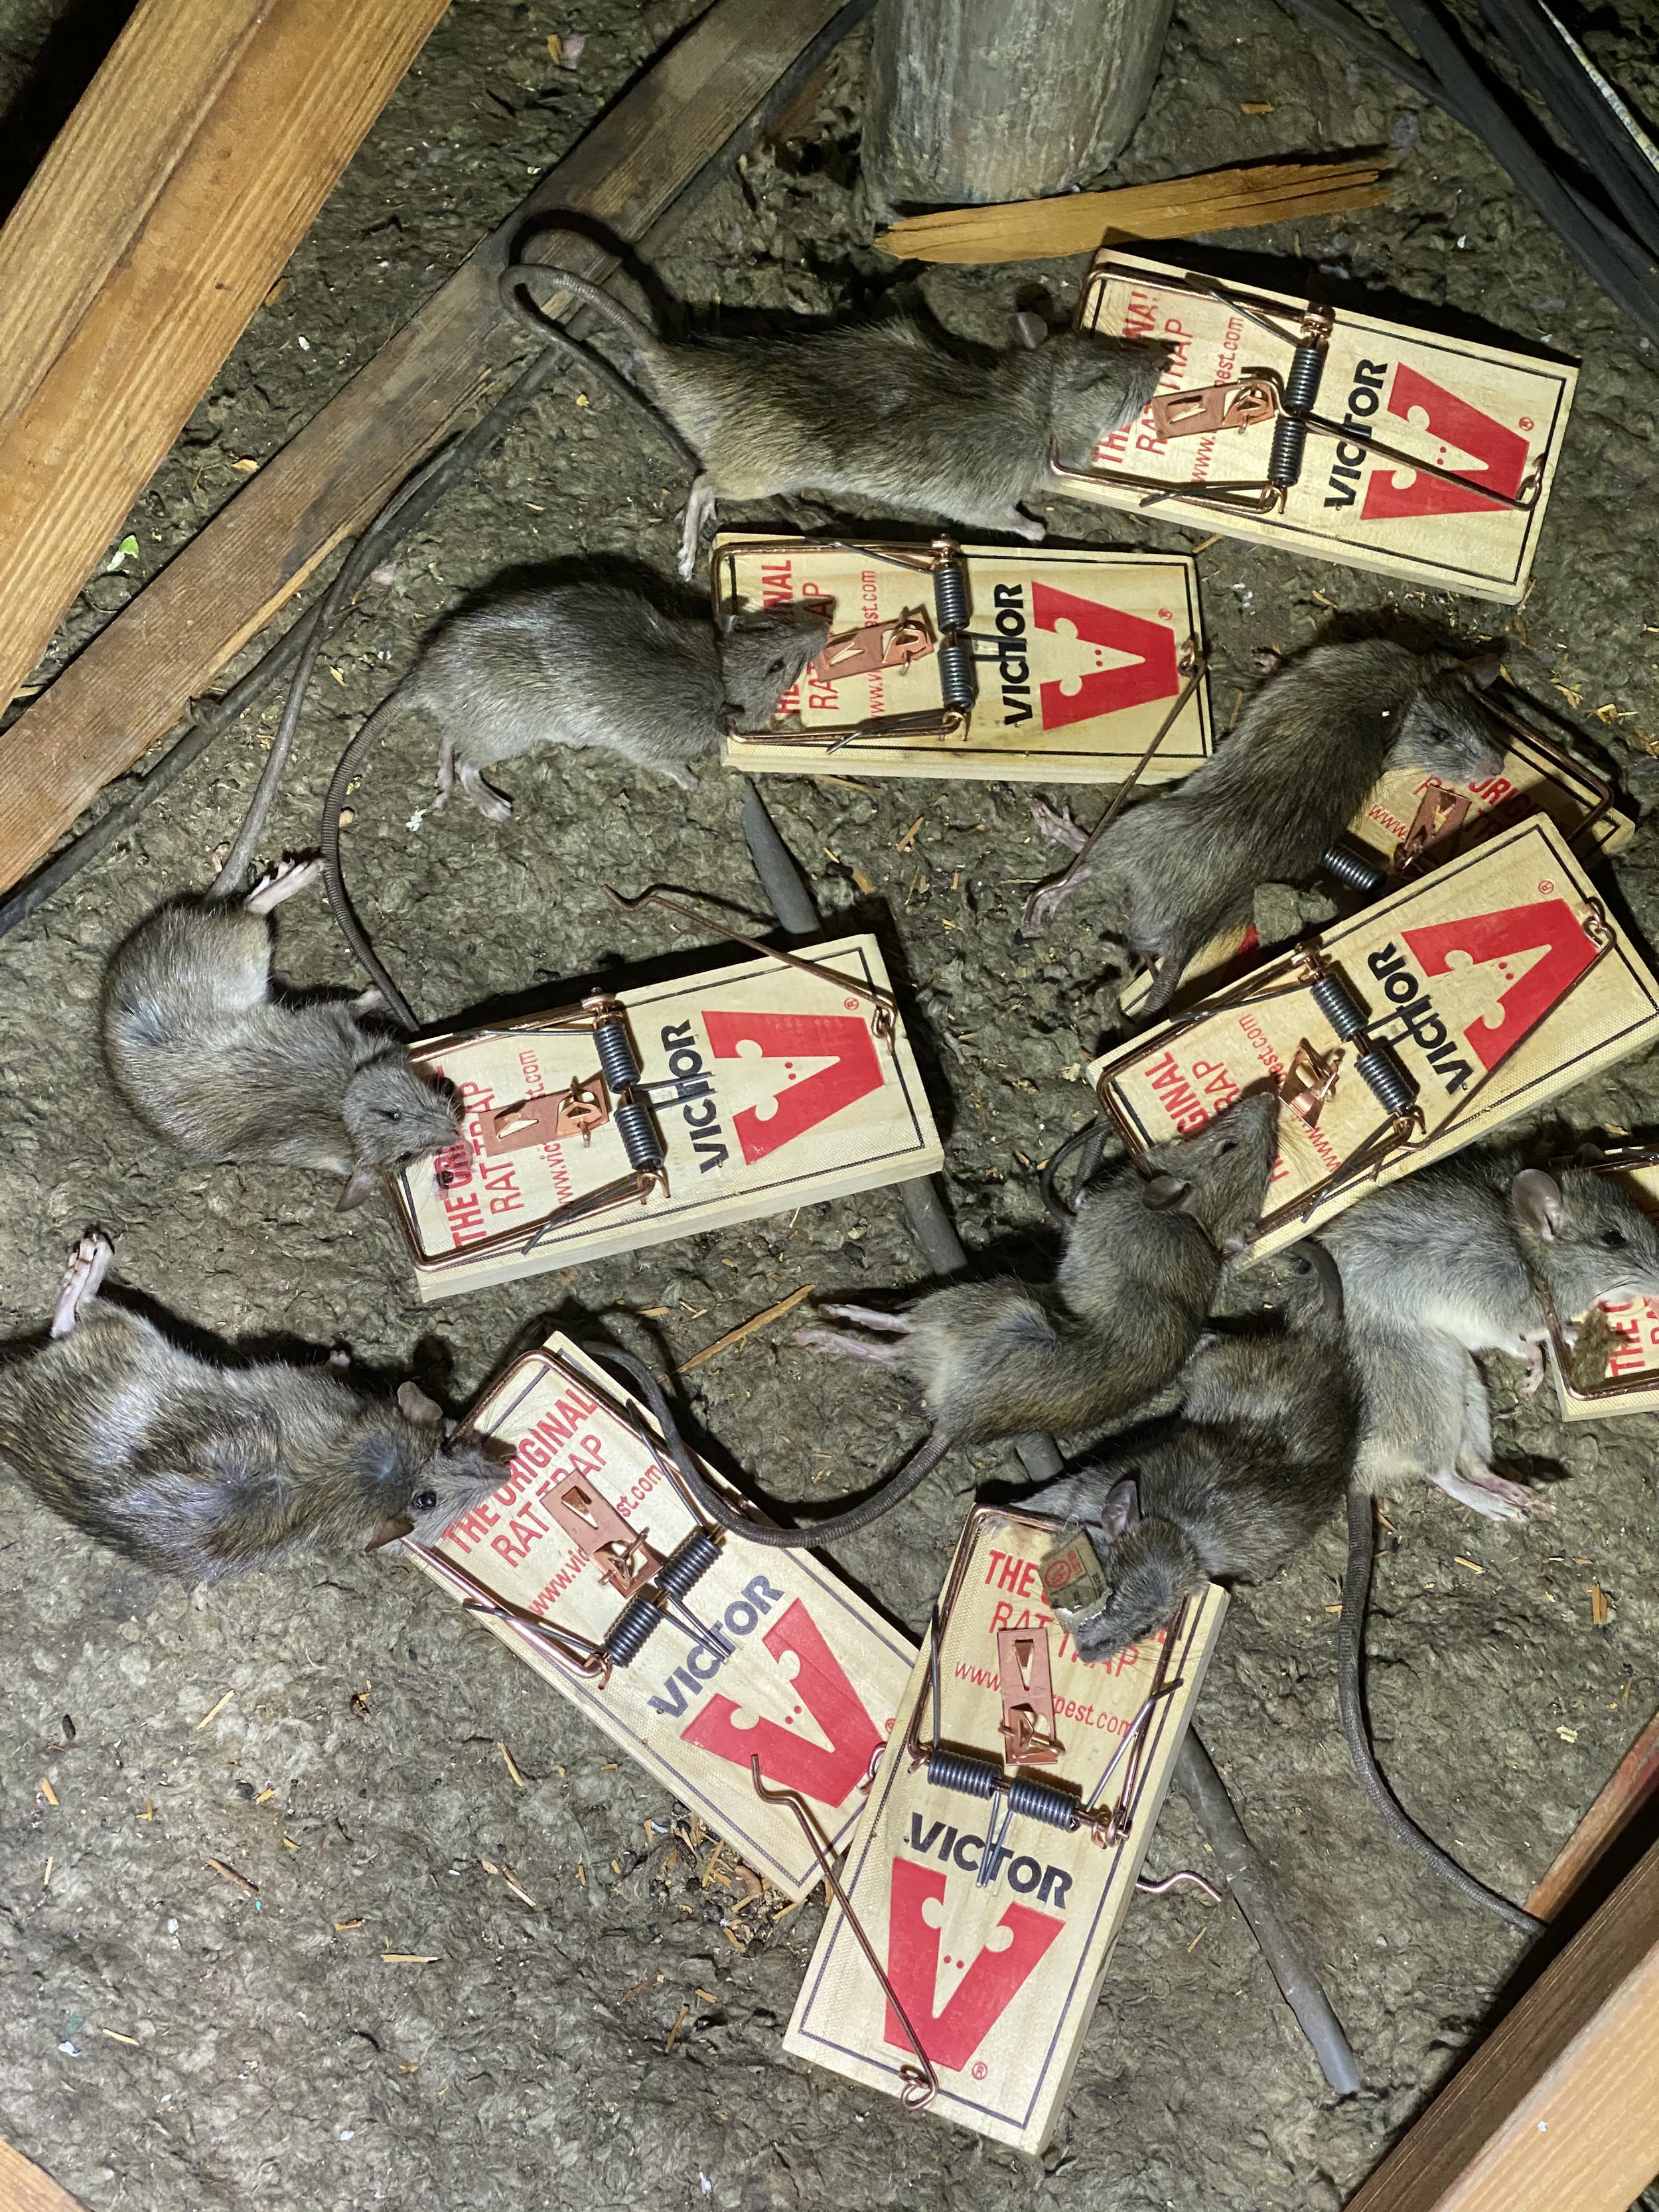 BP shows off carcasses of 90 'humanely' killed rats, calls for more of them